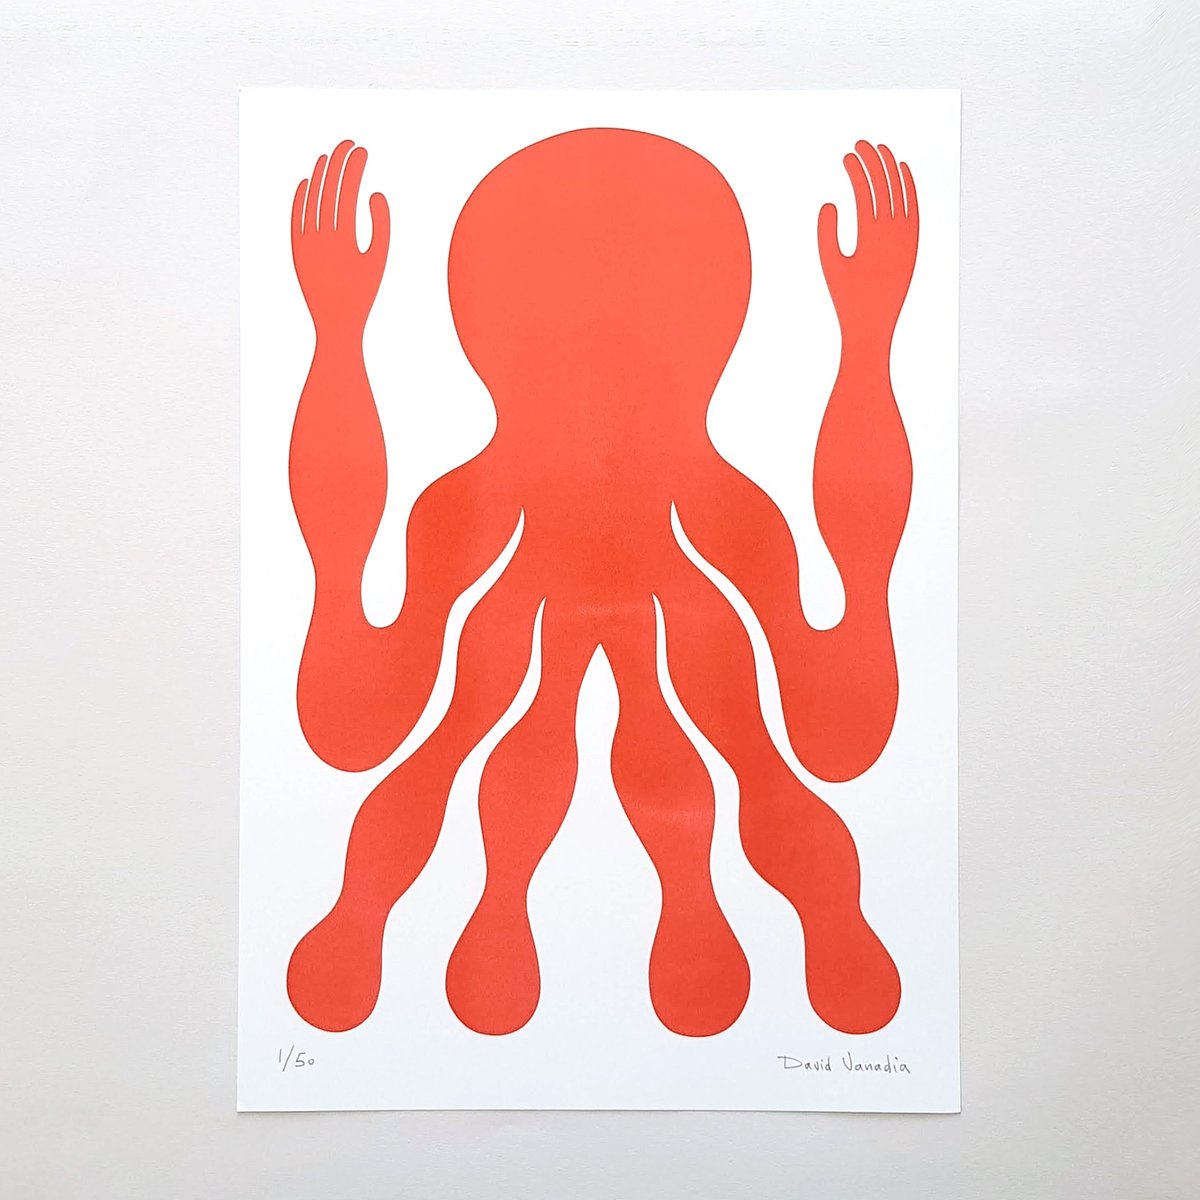 Image of Riso print 30 x 42 cm ‘Homme Poulpe’